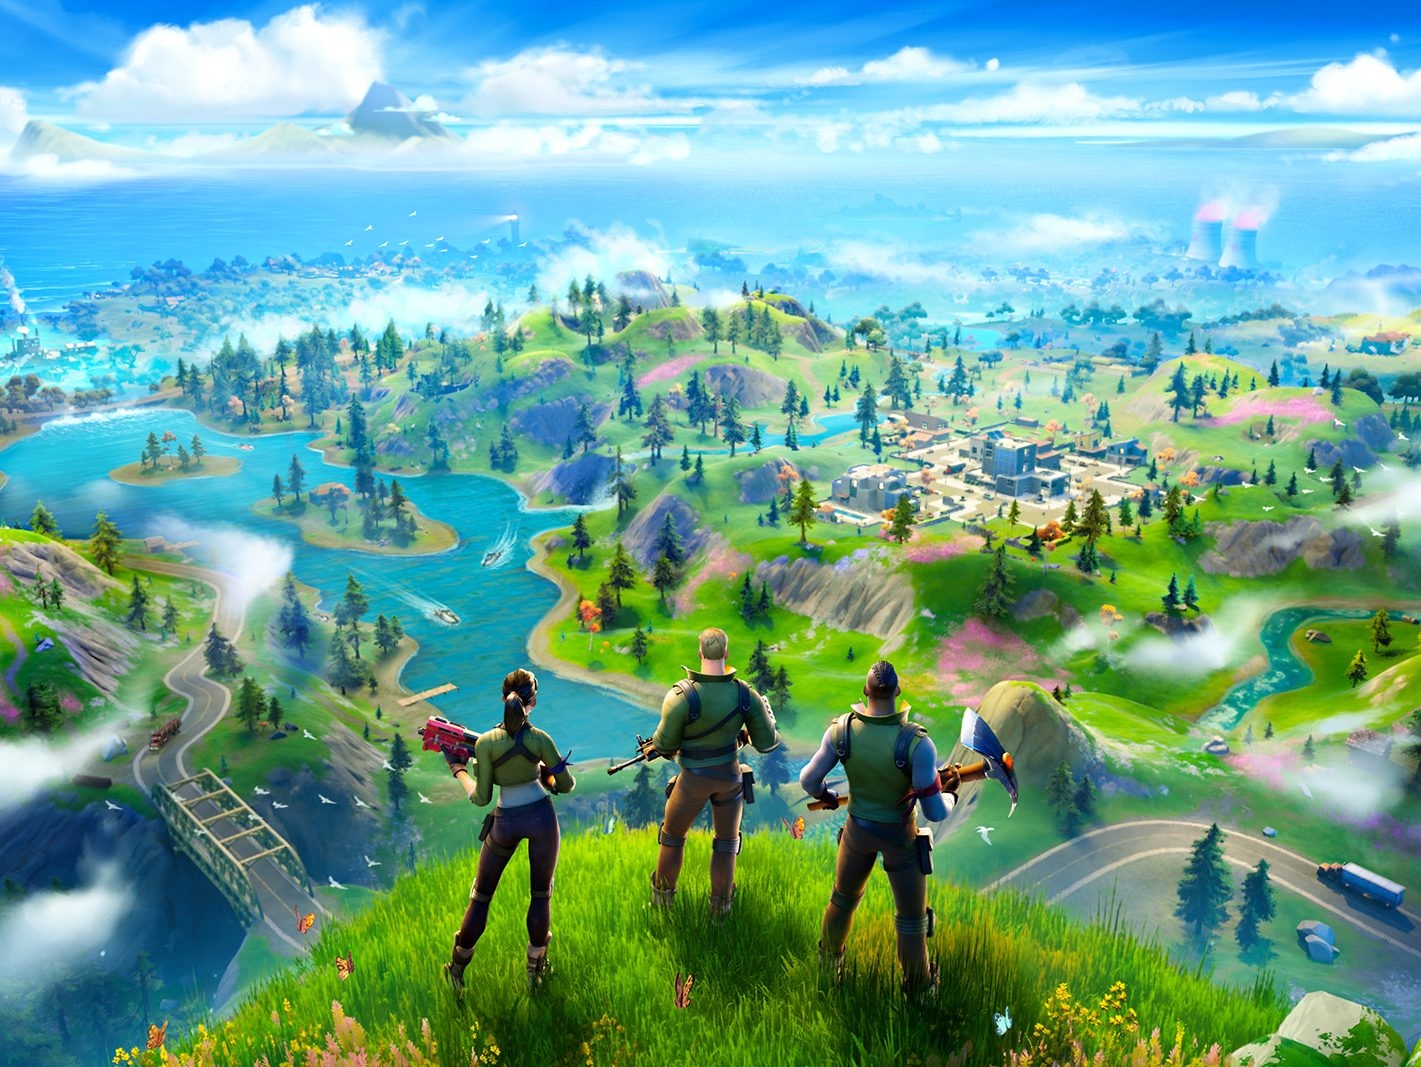 Fortnite players puzzle over the appearance of a mysterious cloud